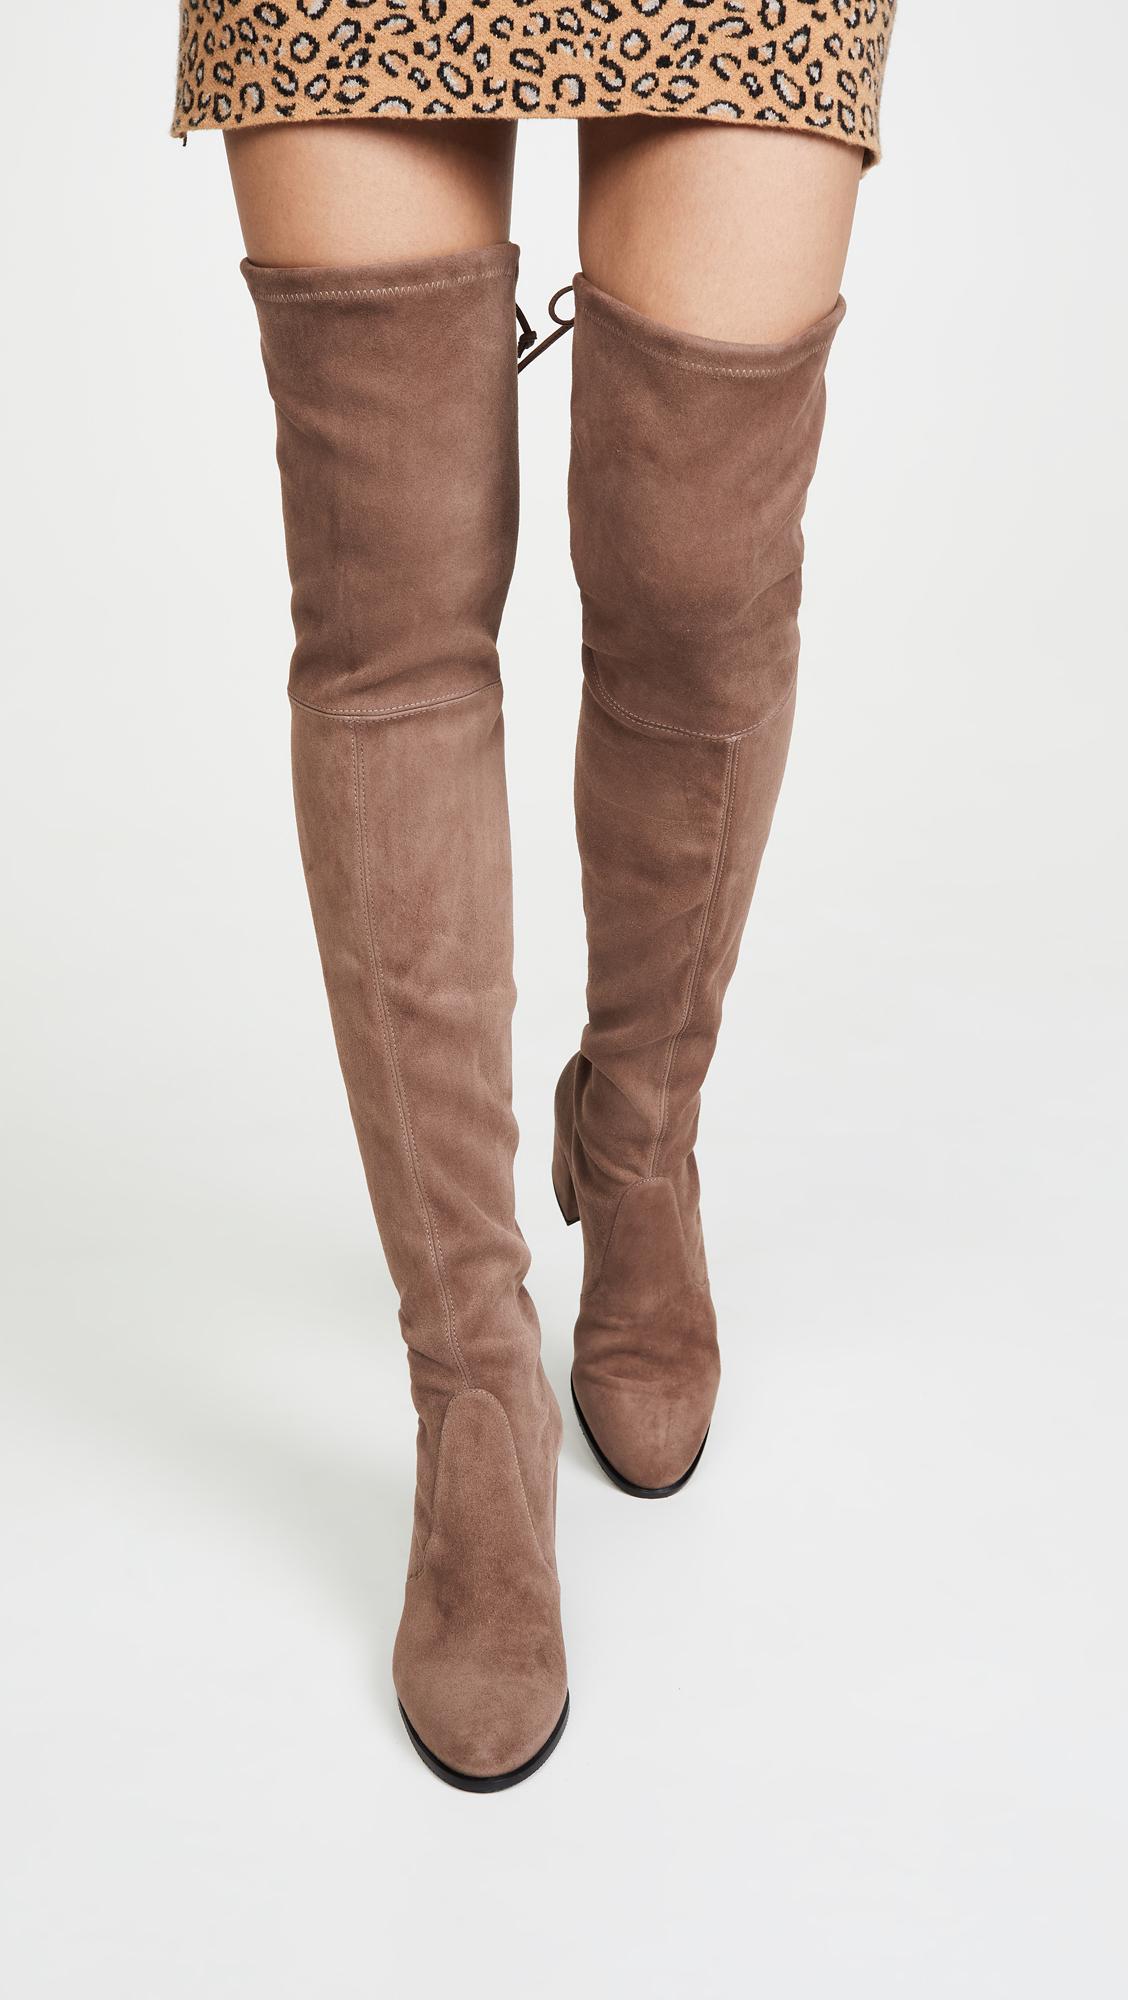 Stuart Weitzman Suede Hiline Over The Knee Boots in Taupe (Brown) Lyst